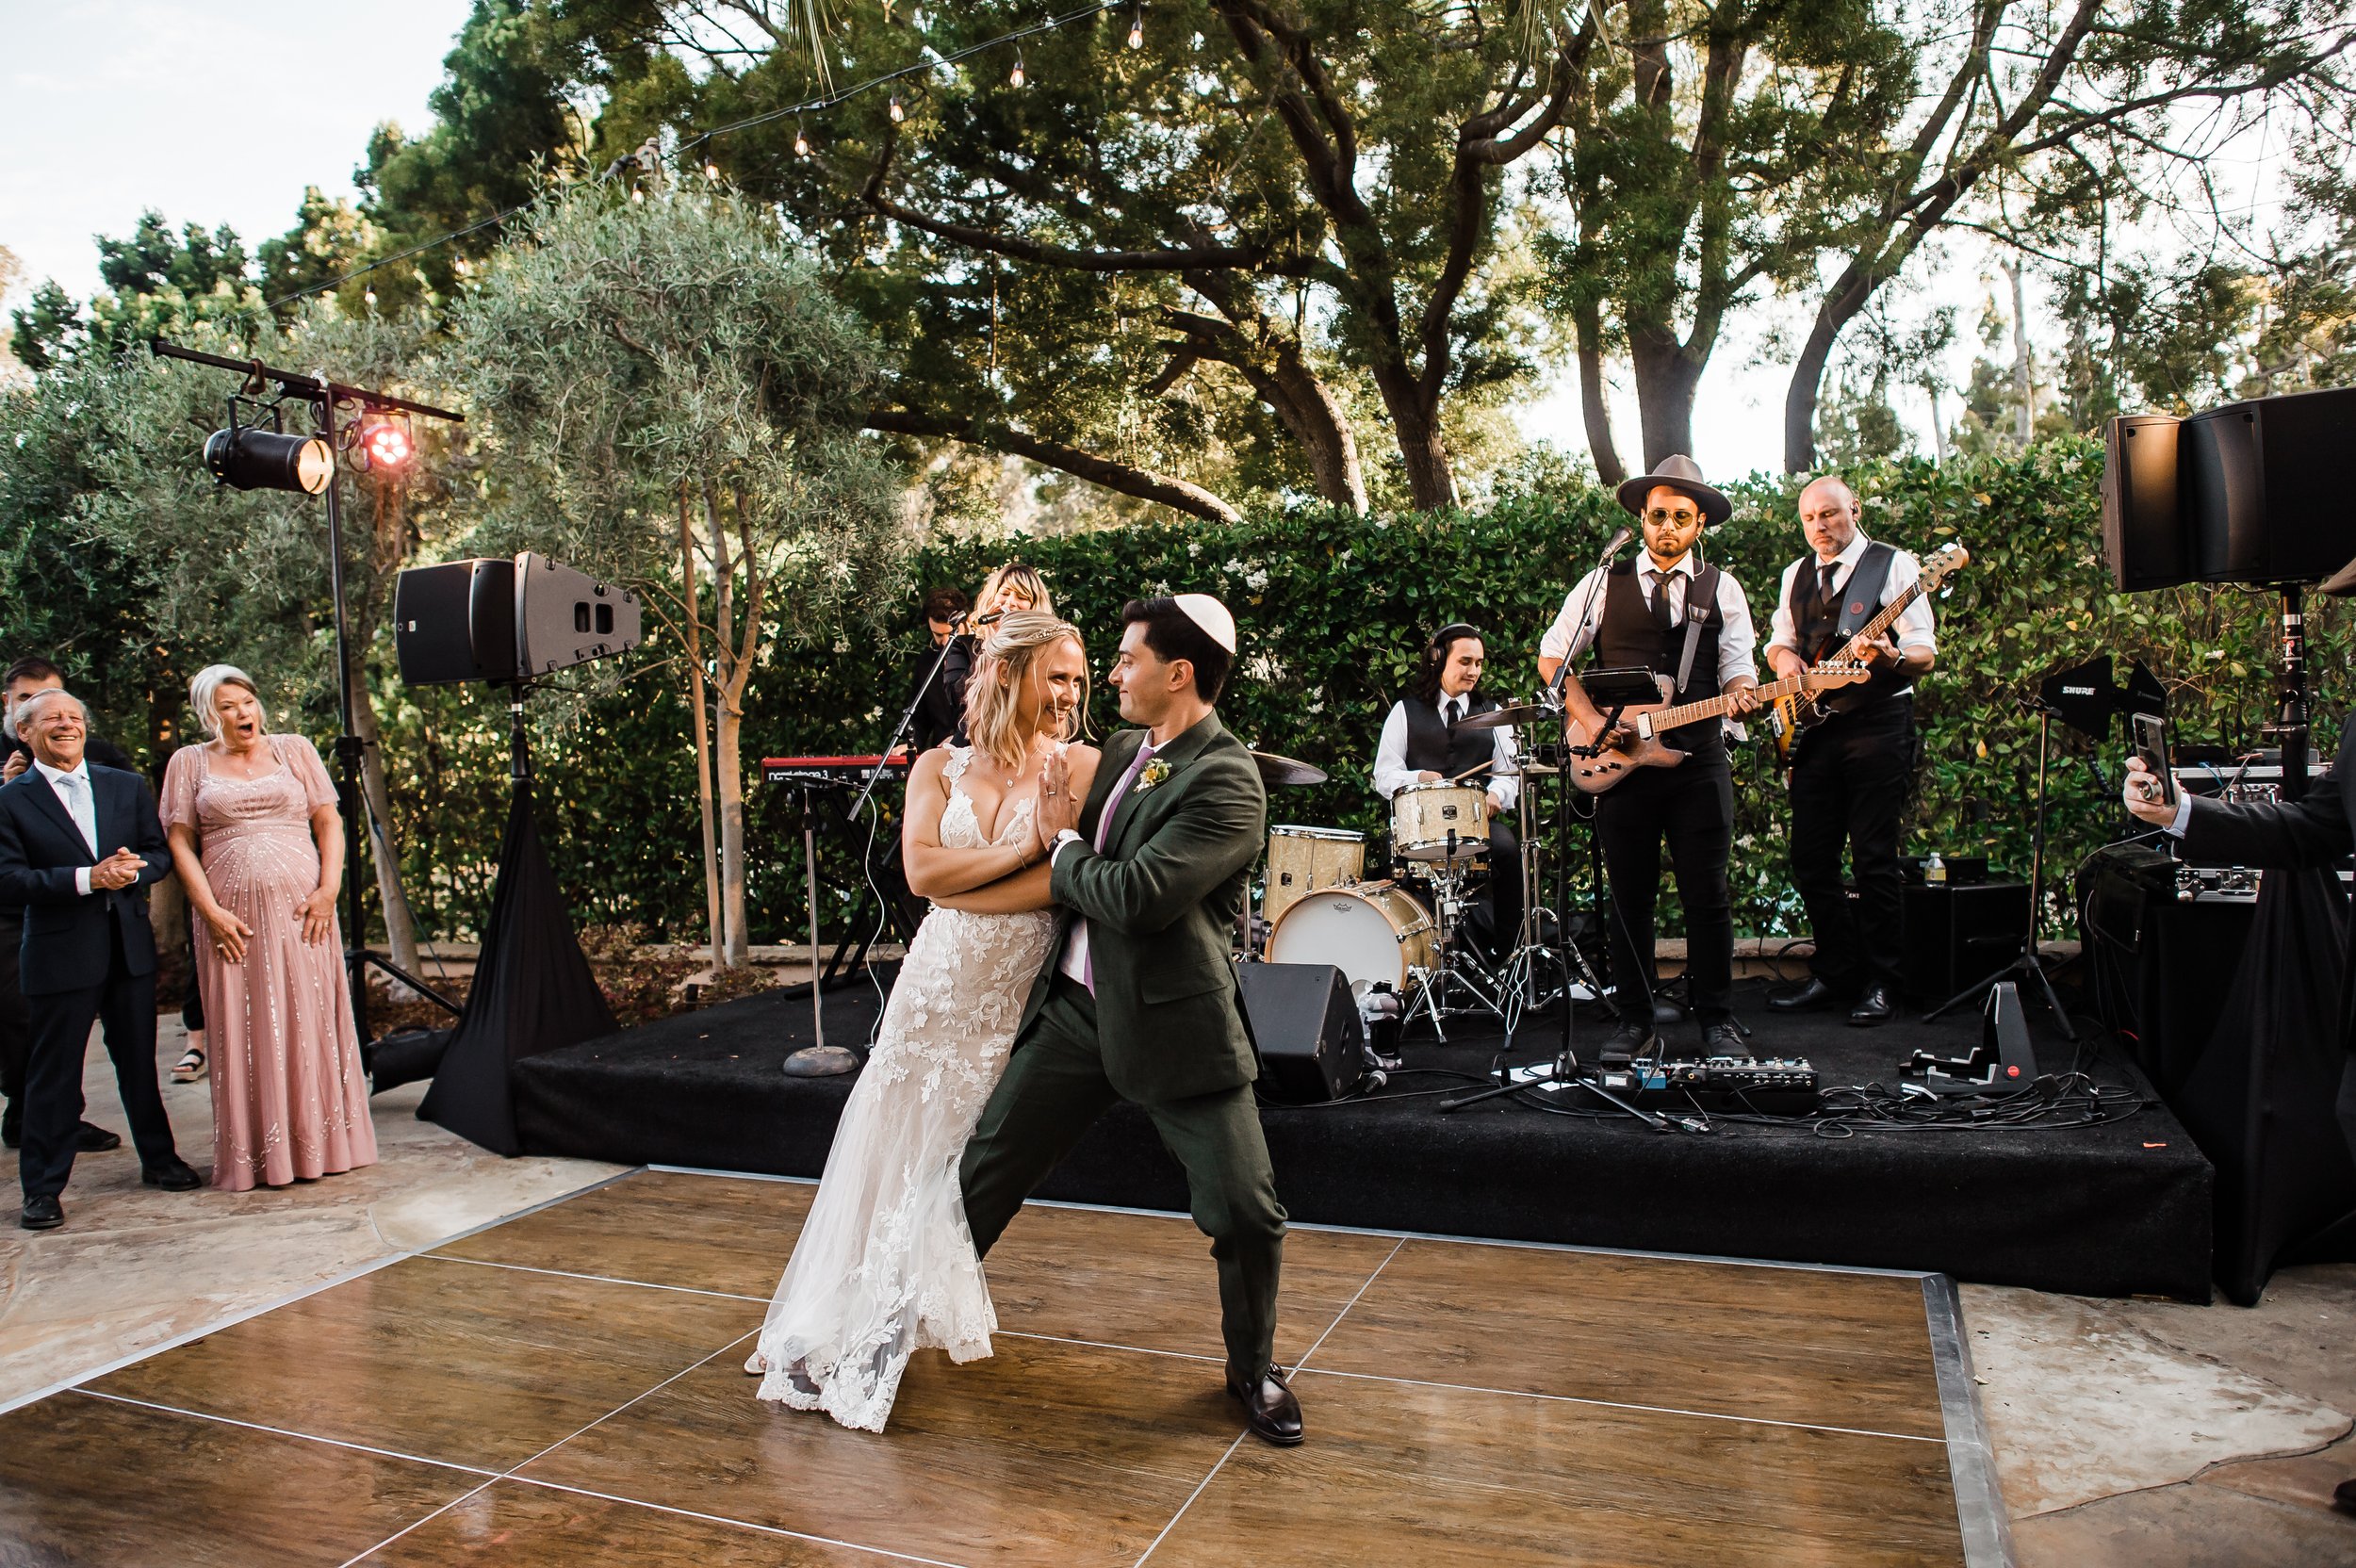 www.santabarbarawedding.com | Michelle Ramirez | Pamela Glavin | The Replicas Music | Couple Dancing at Wedding Reception with Band in the Background